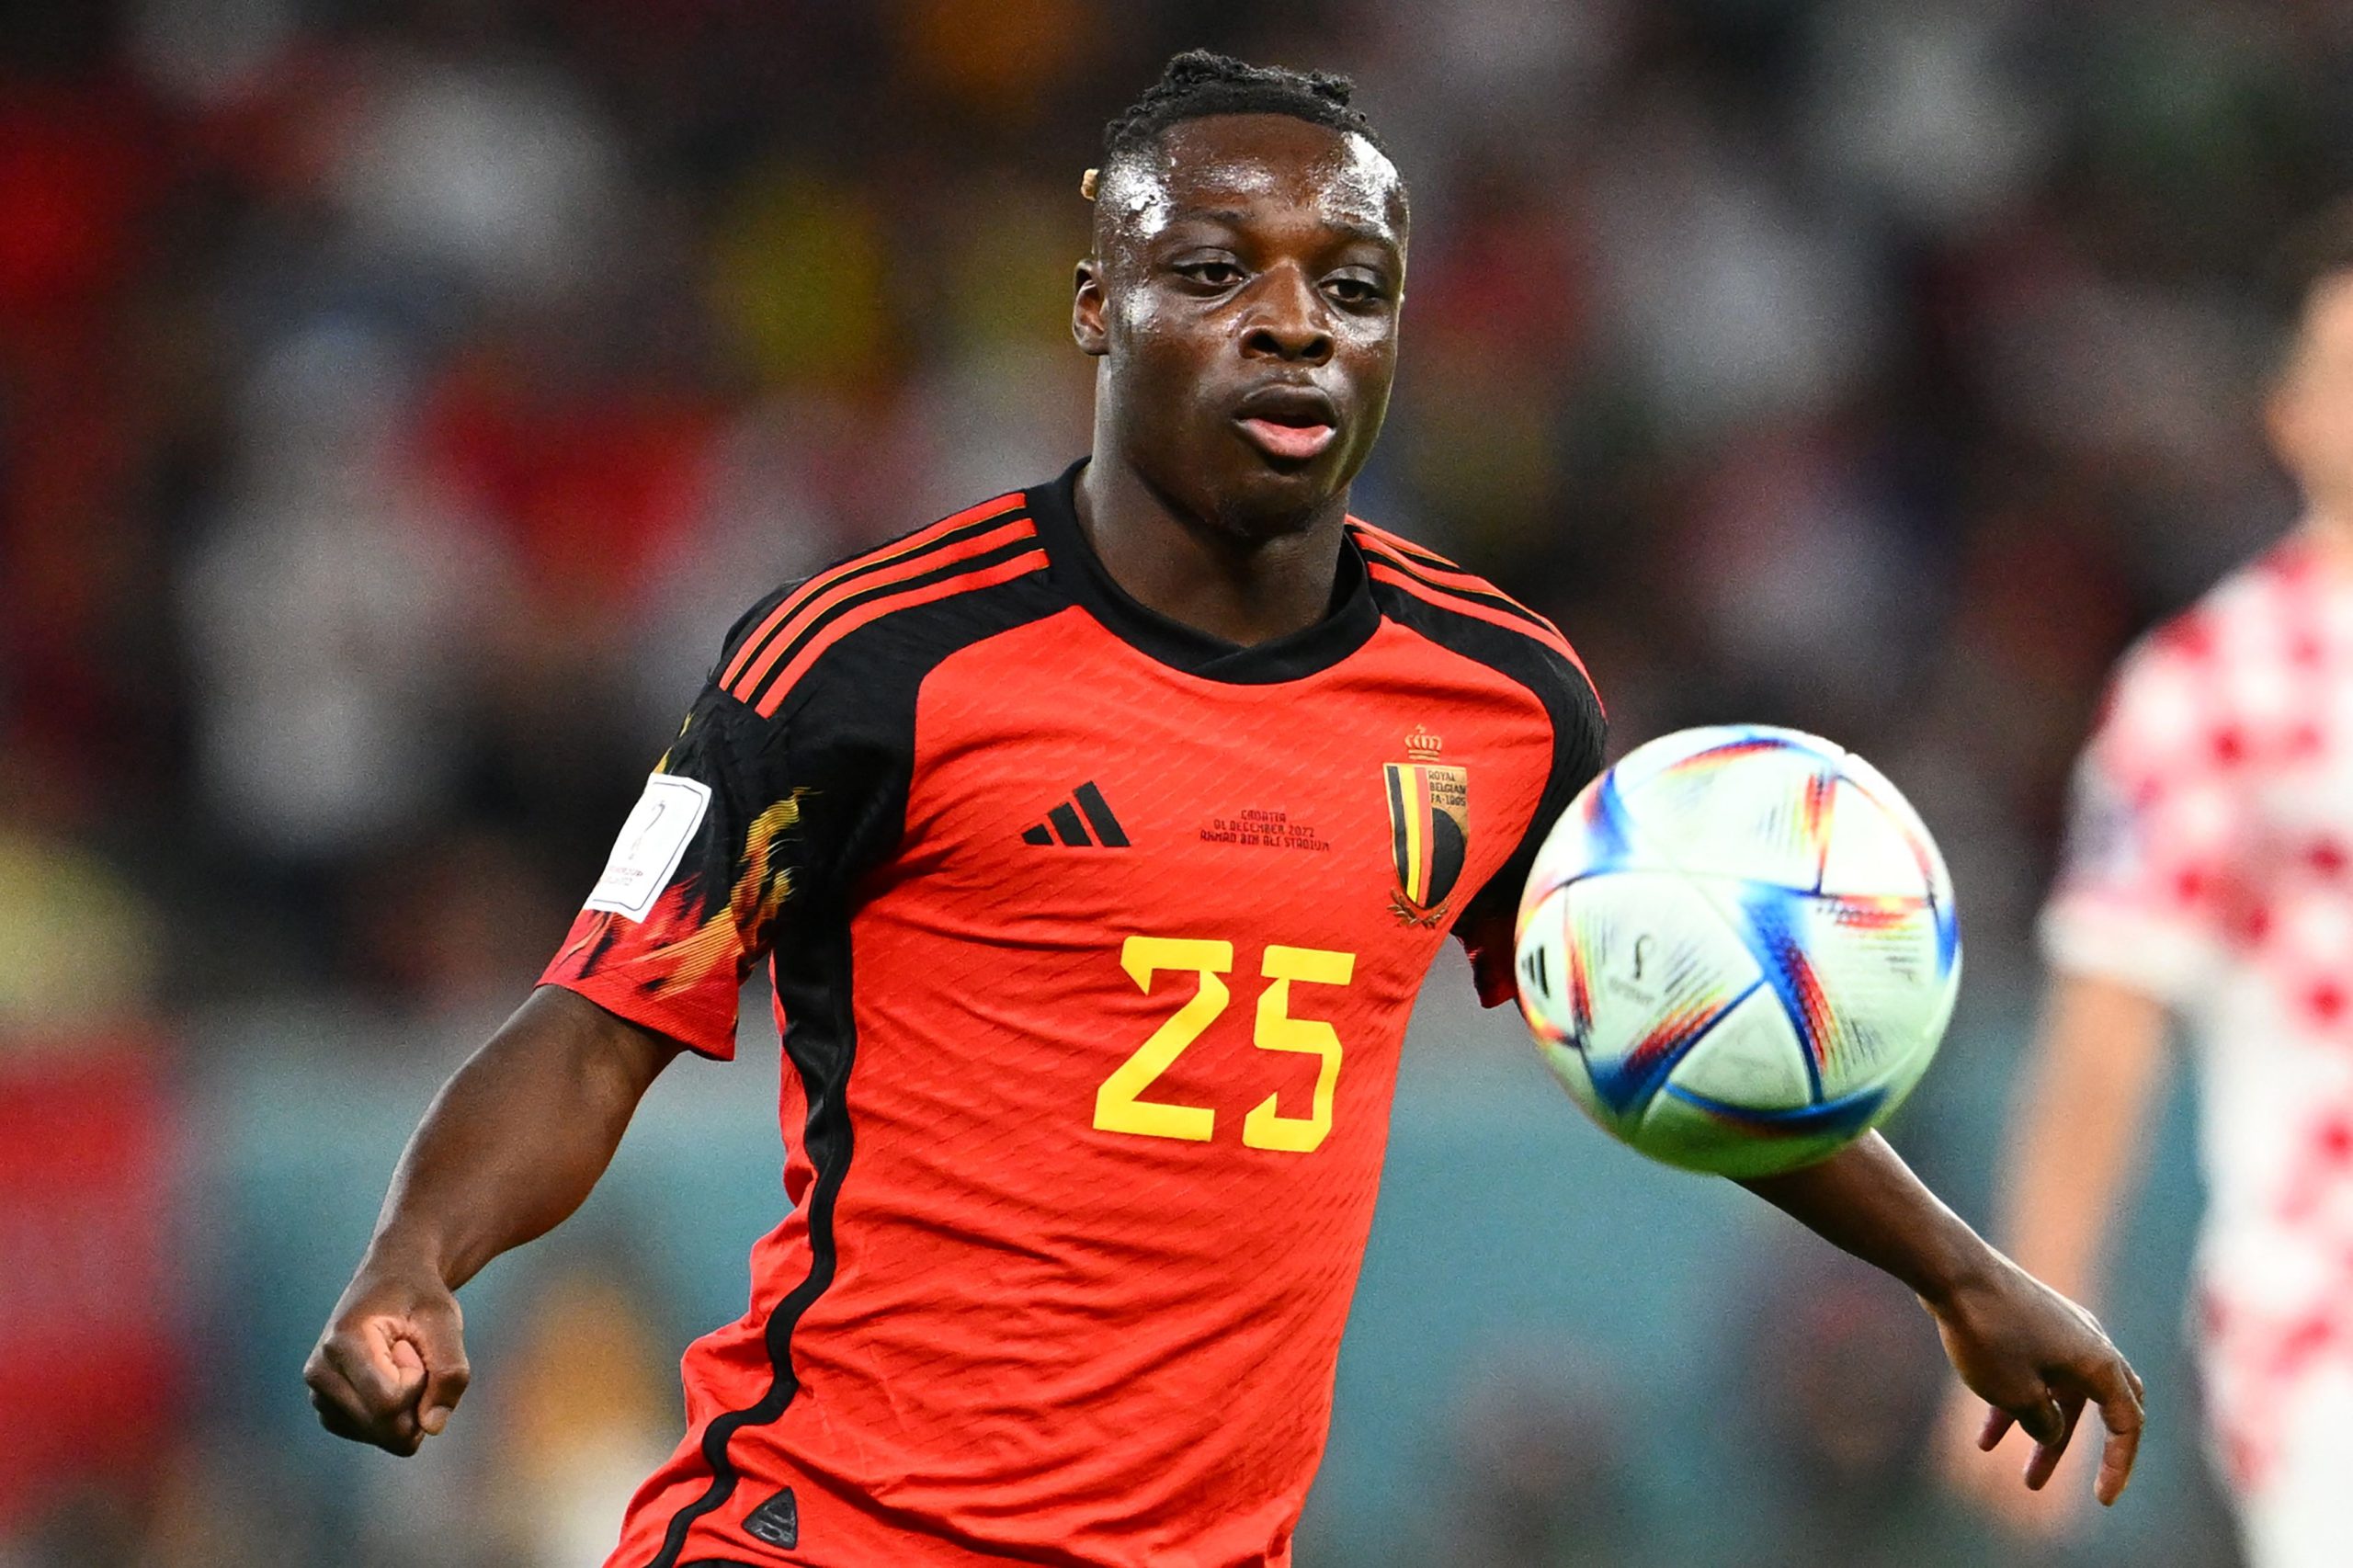 Manchester City agree €65 million fee with Stade Rennais for Chelsea target Jeremy Doku.